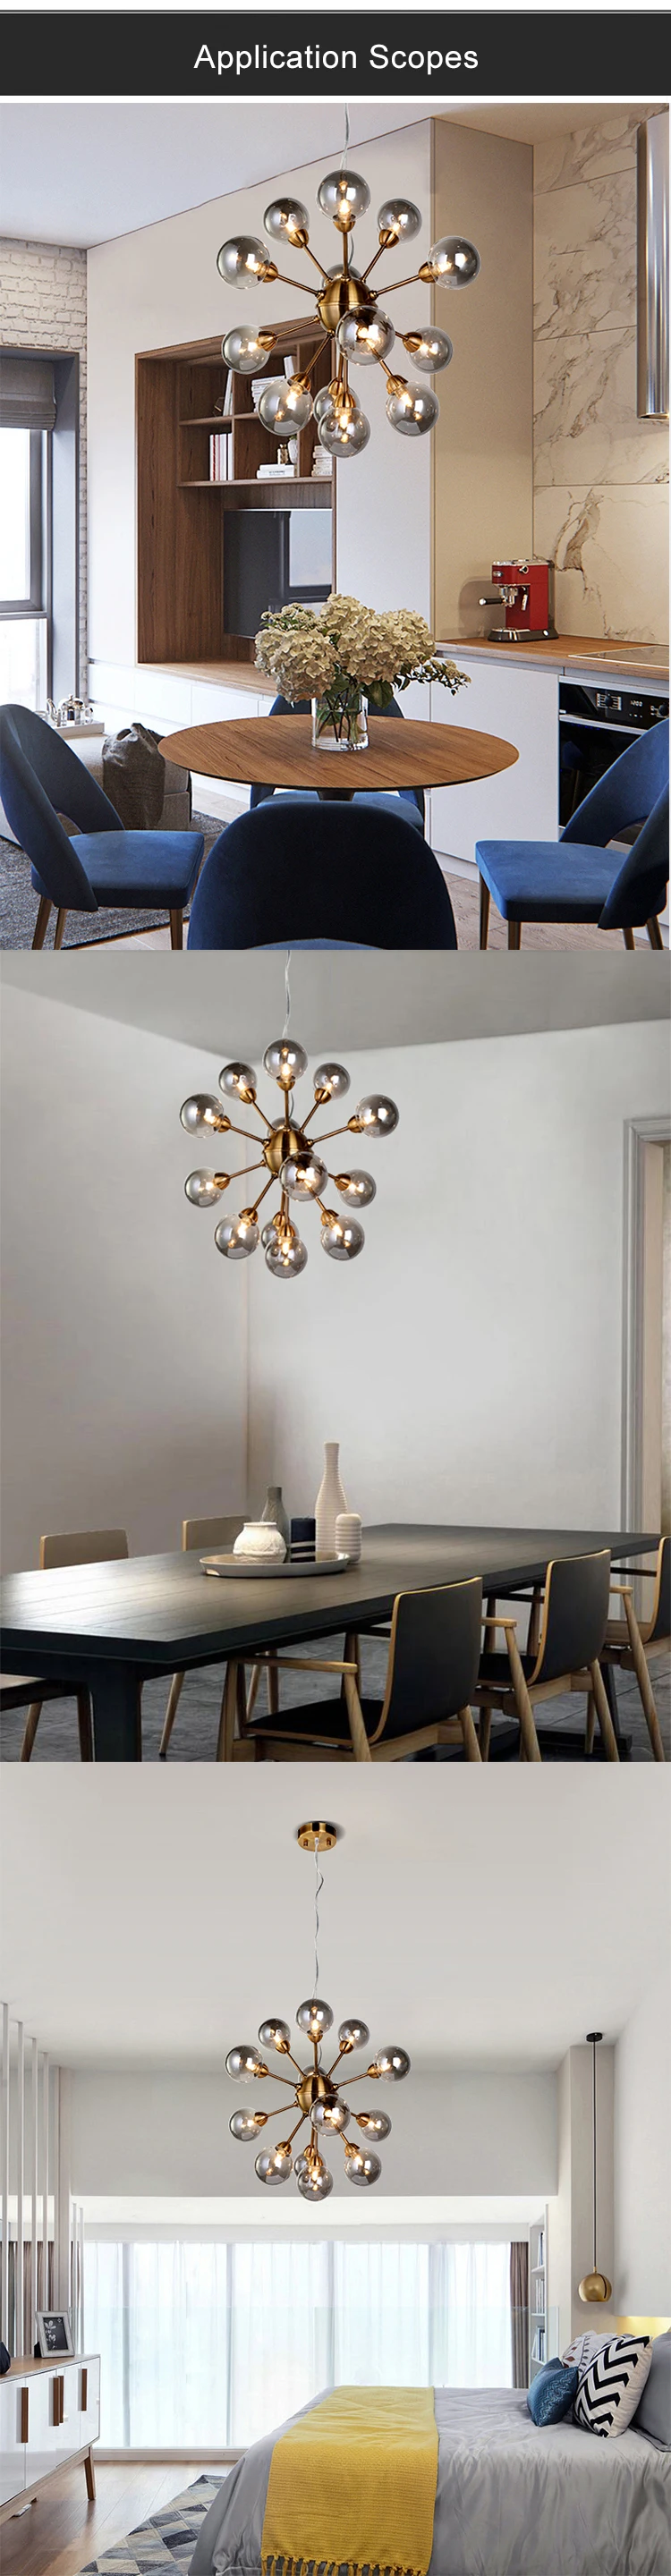 Modern Design Smoky Glass ball Shade Pendant Light Fixtures For Kitchen And Living Room